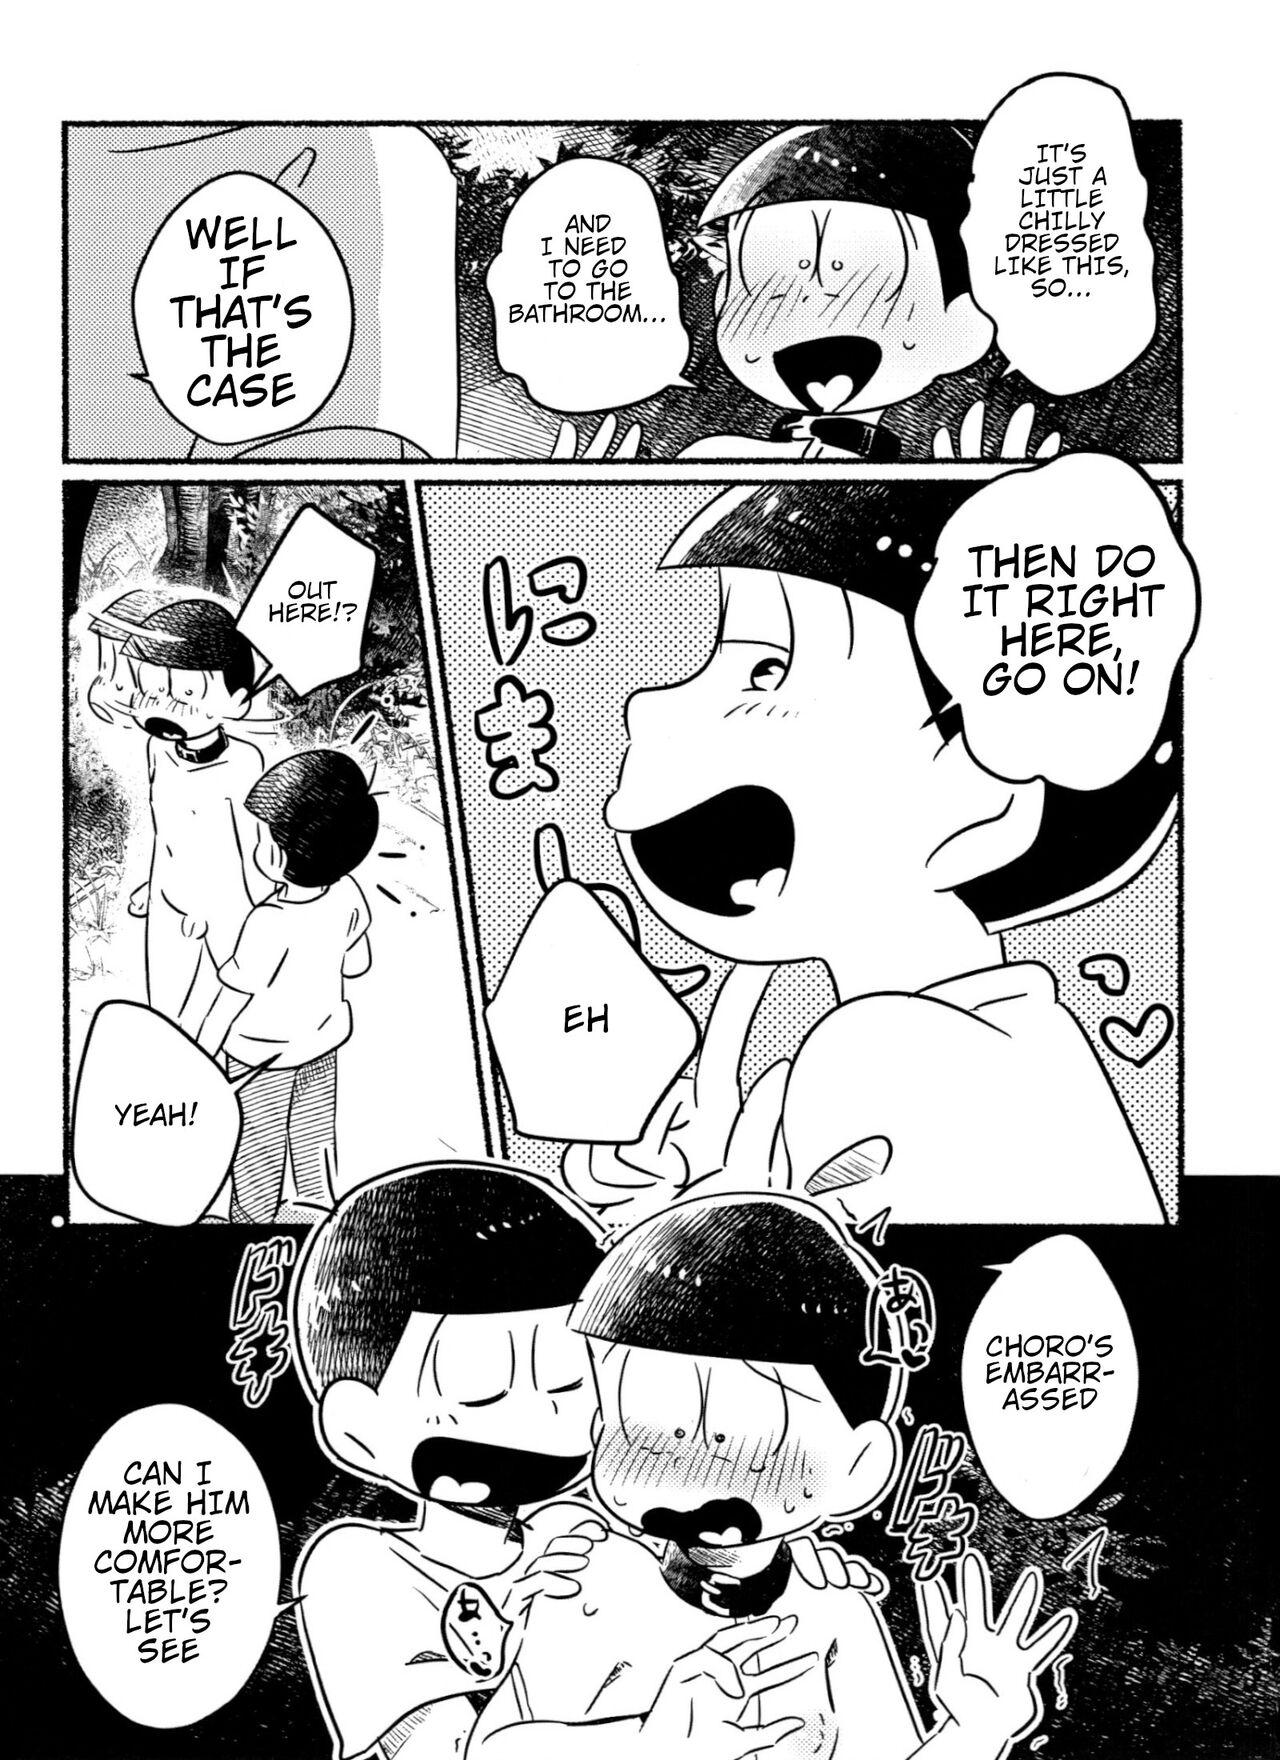 Inspector Choromatsu walks naked at night and does XXX in the public eye R18 book 11